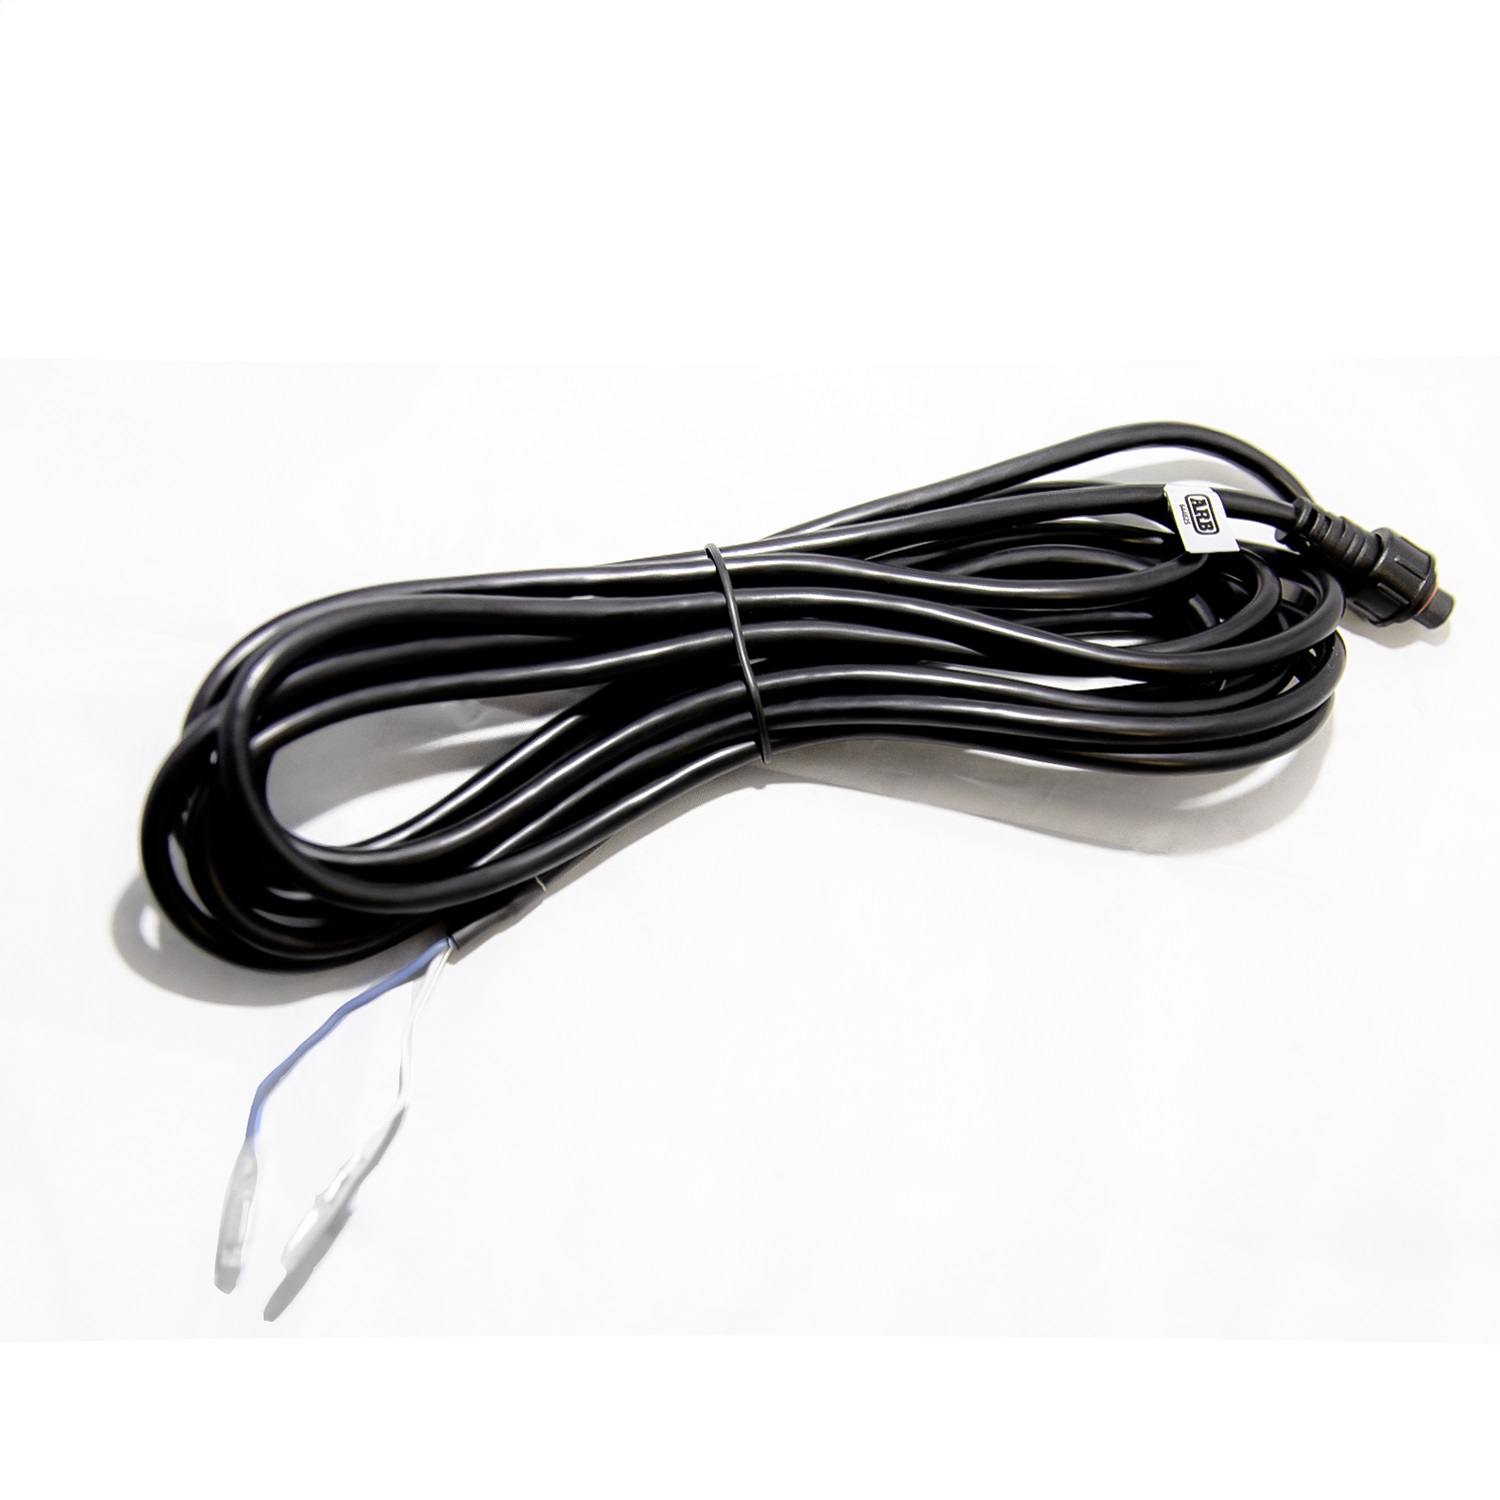 Show details for ARB SJBLINX Arb Wiring Harness